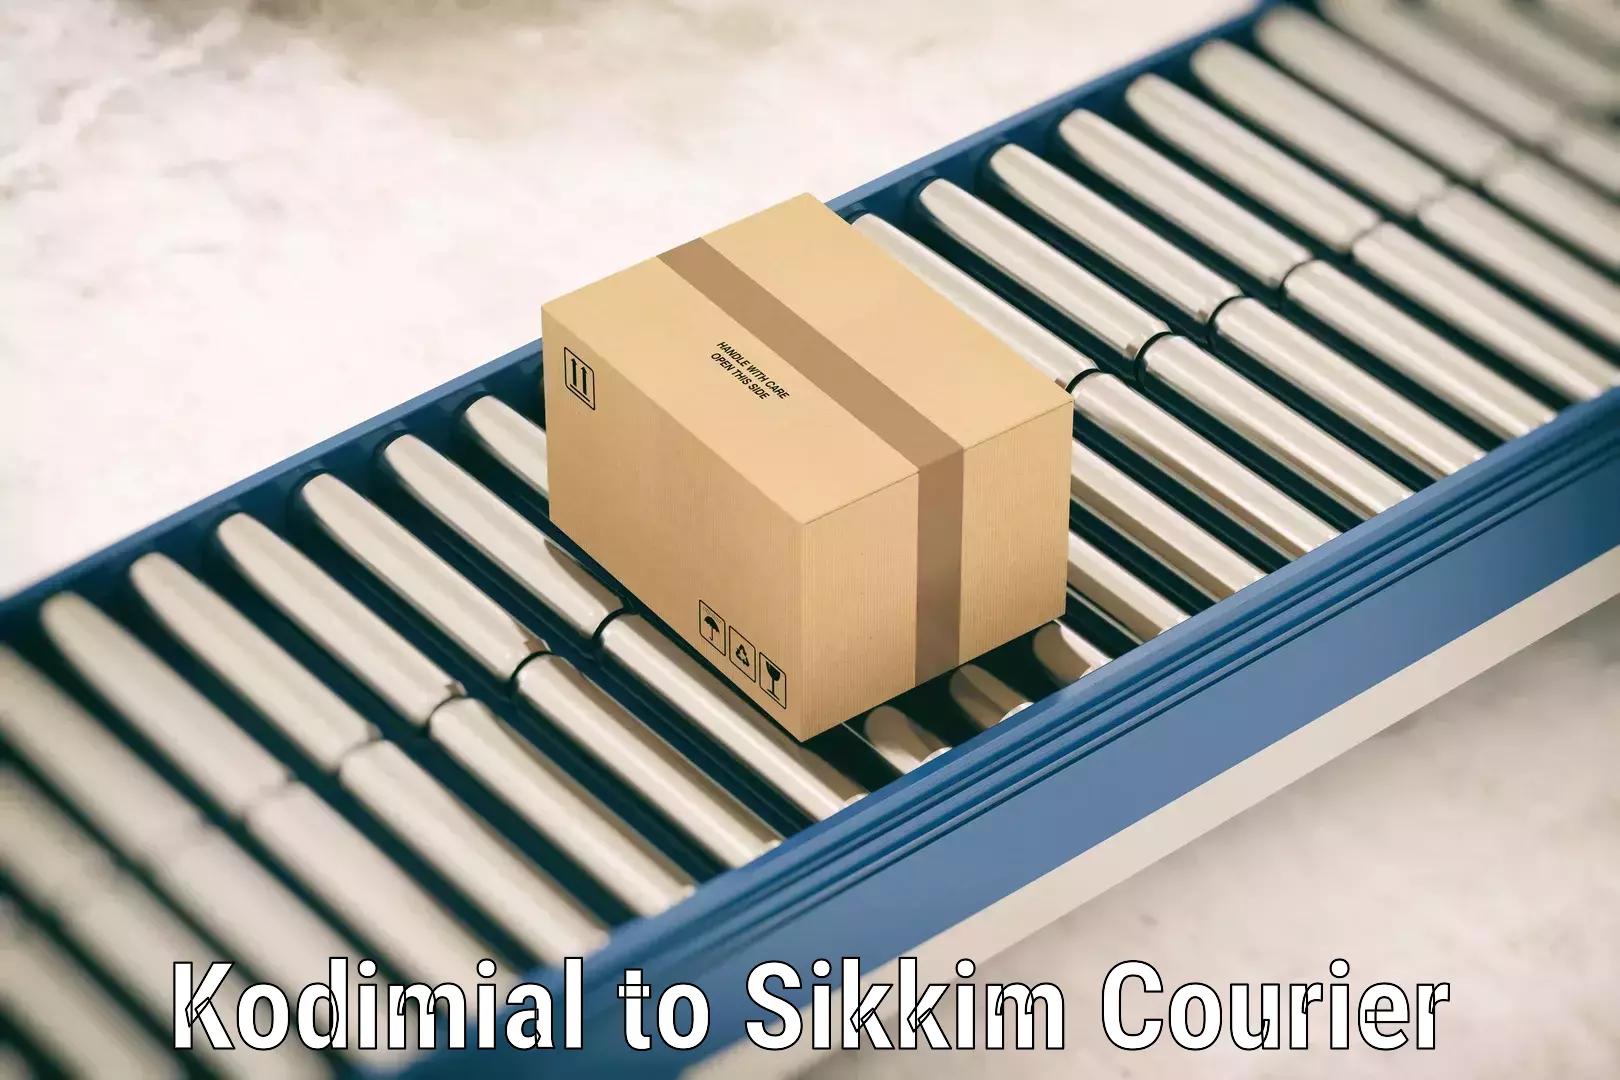 Online luggage shipping booking Kodimial to Sikkim